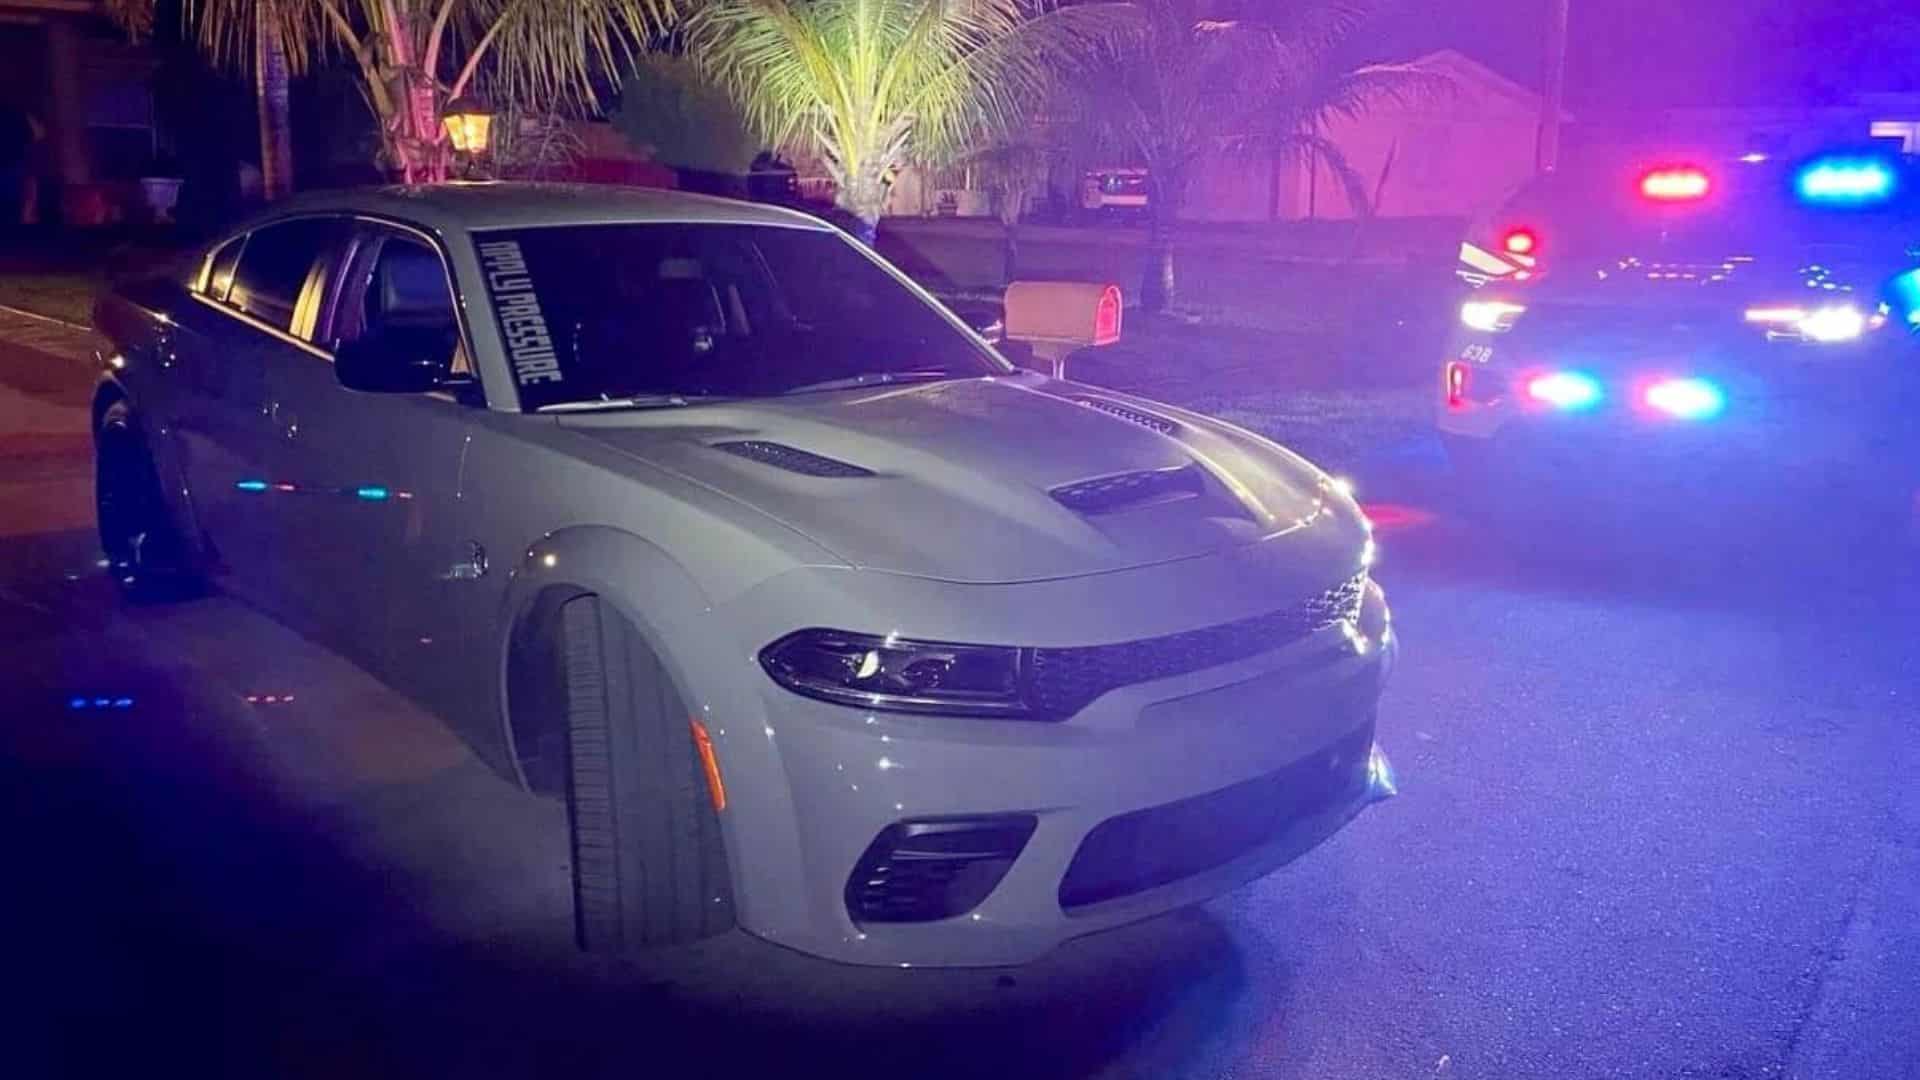 Woman Pushes Hellcat To 117 MPH In Street Race With A Child In The Backseat